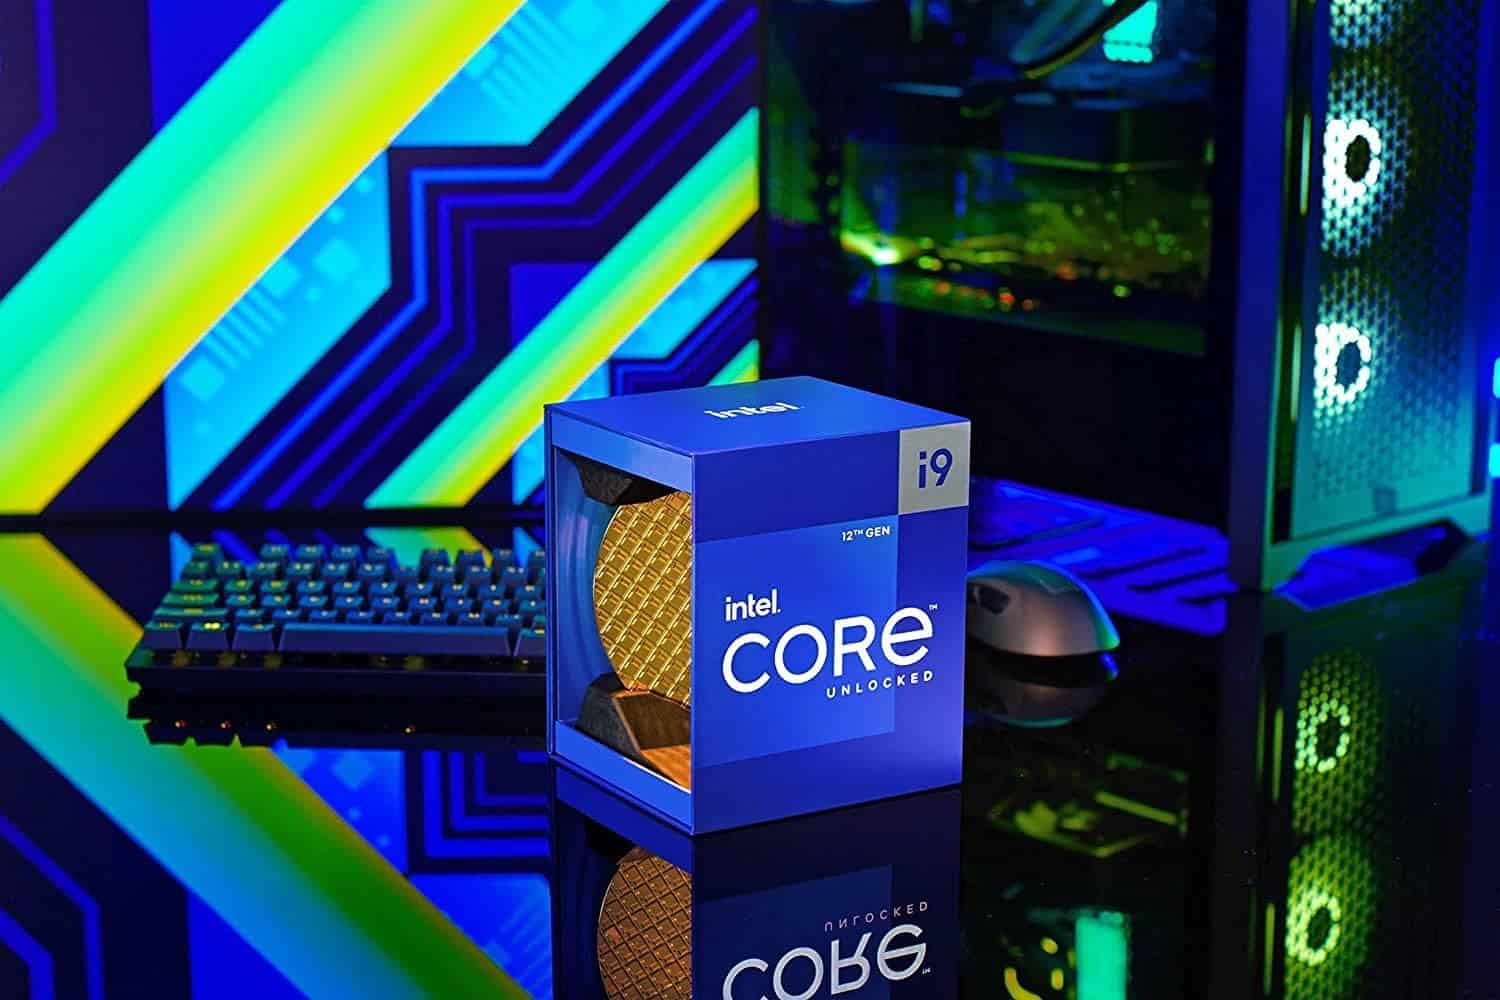 This Intel gaming desktop CPU is available at an insane discount